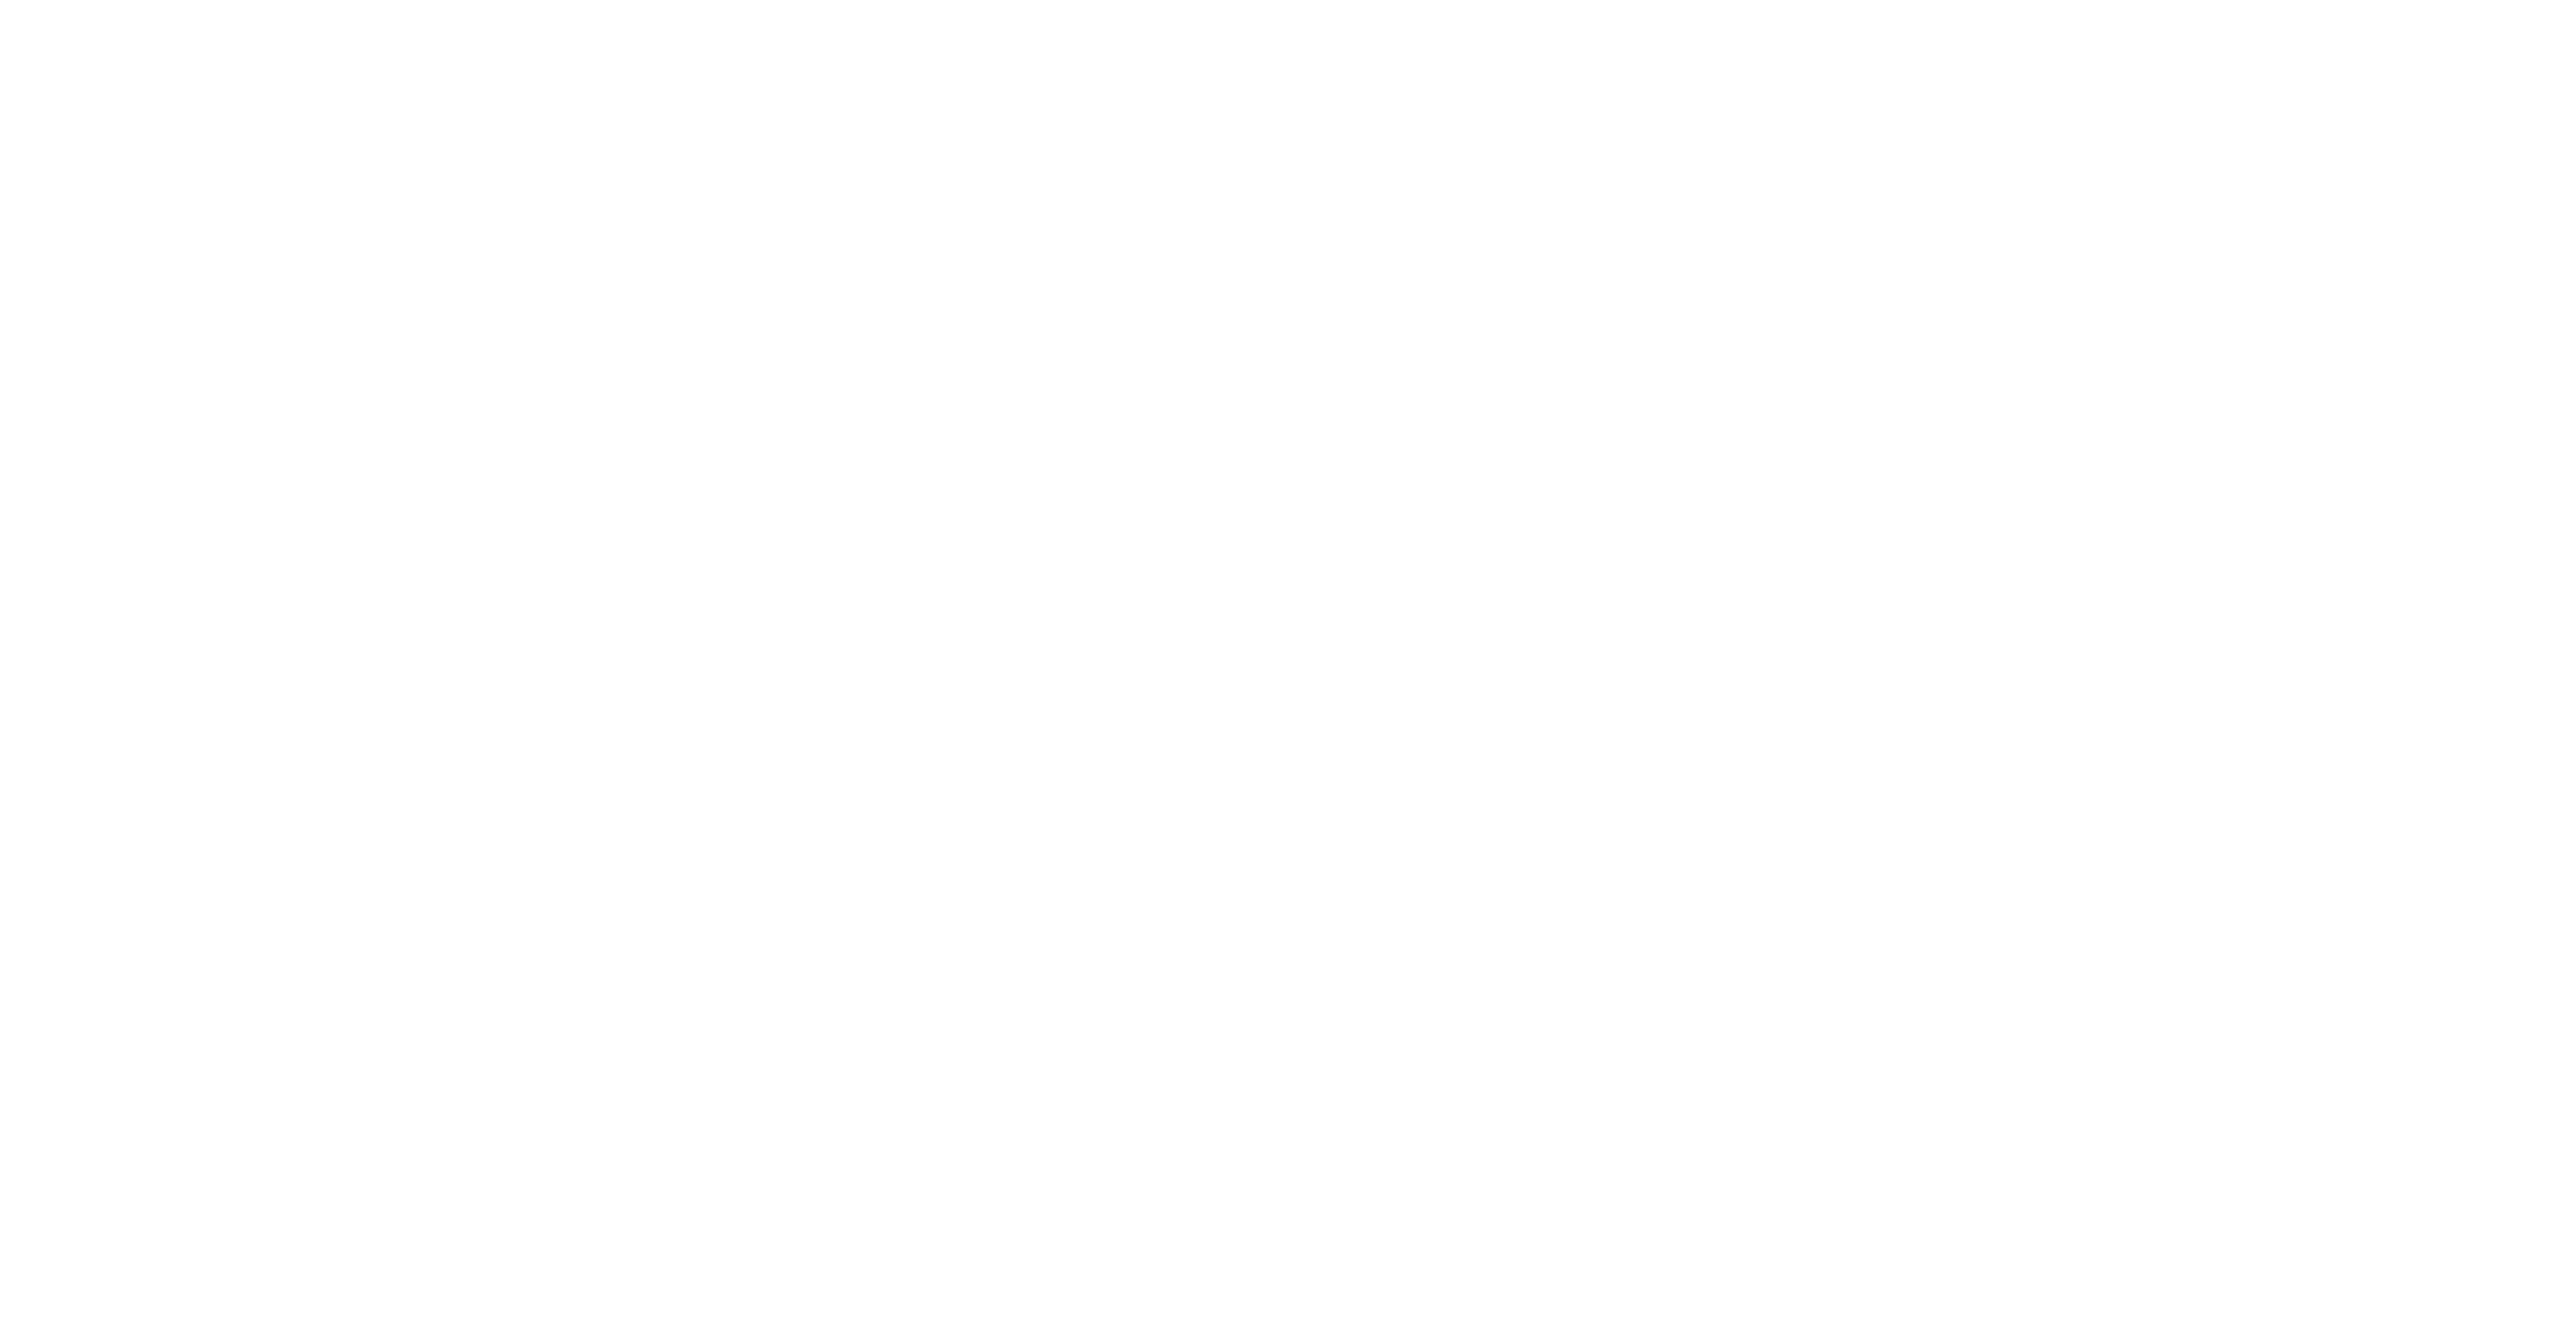 Charge the Future